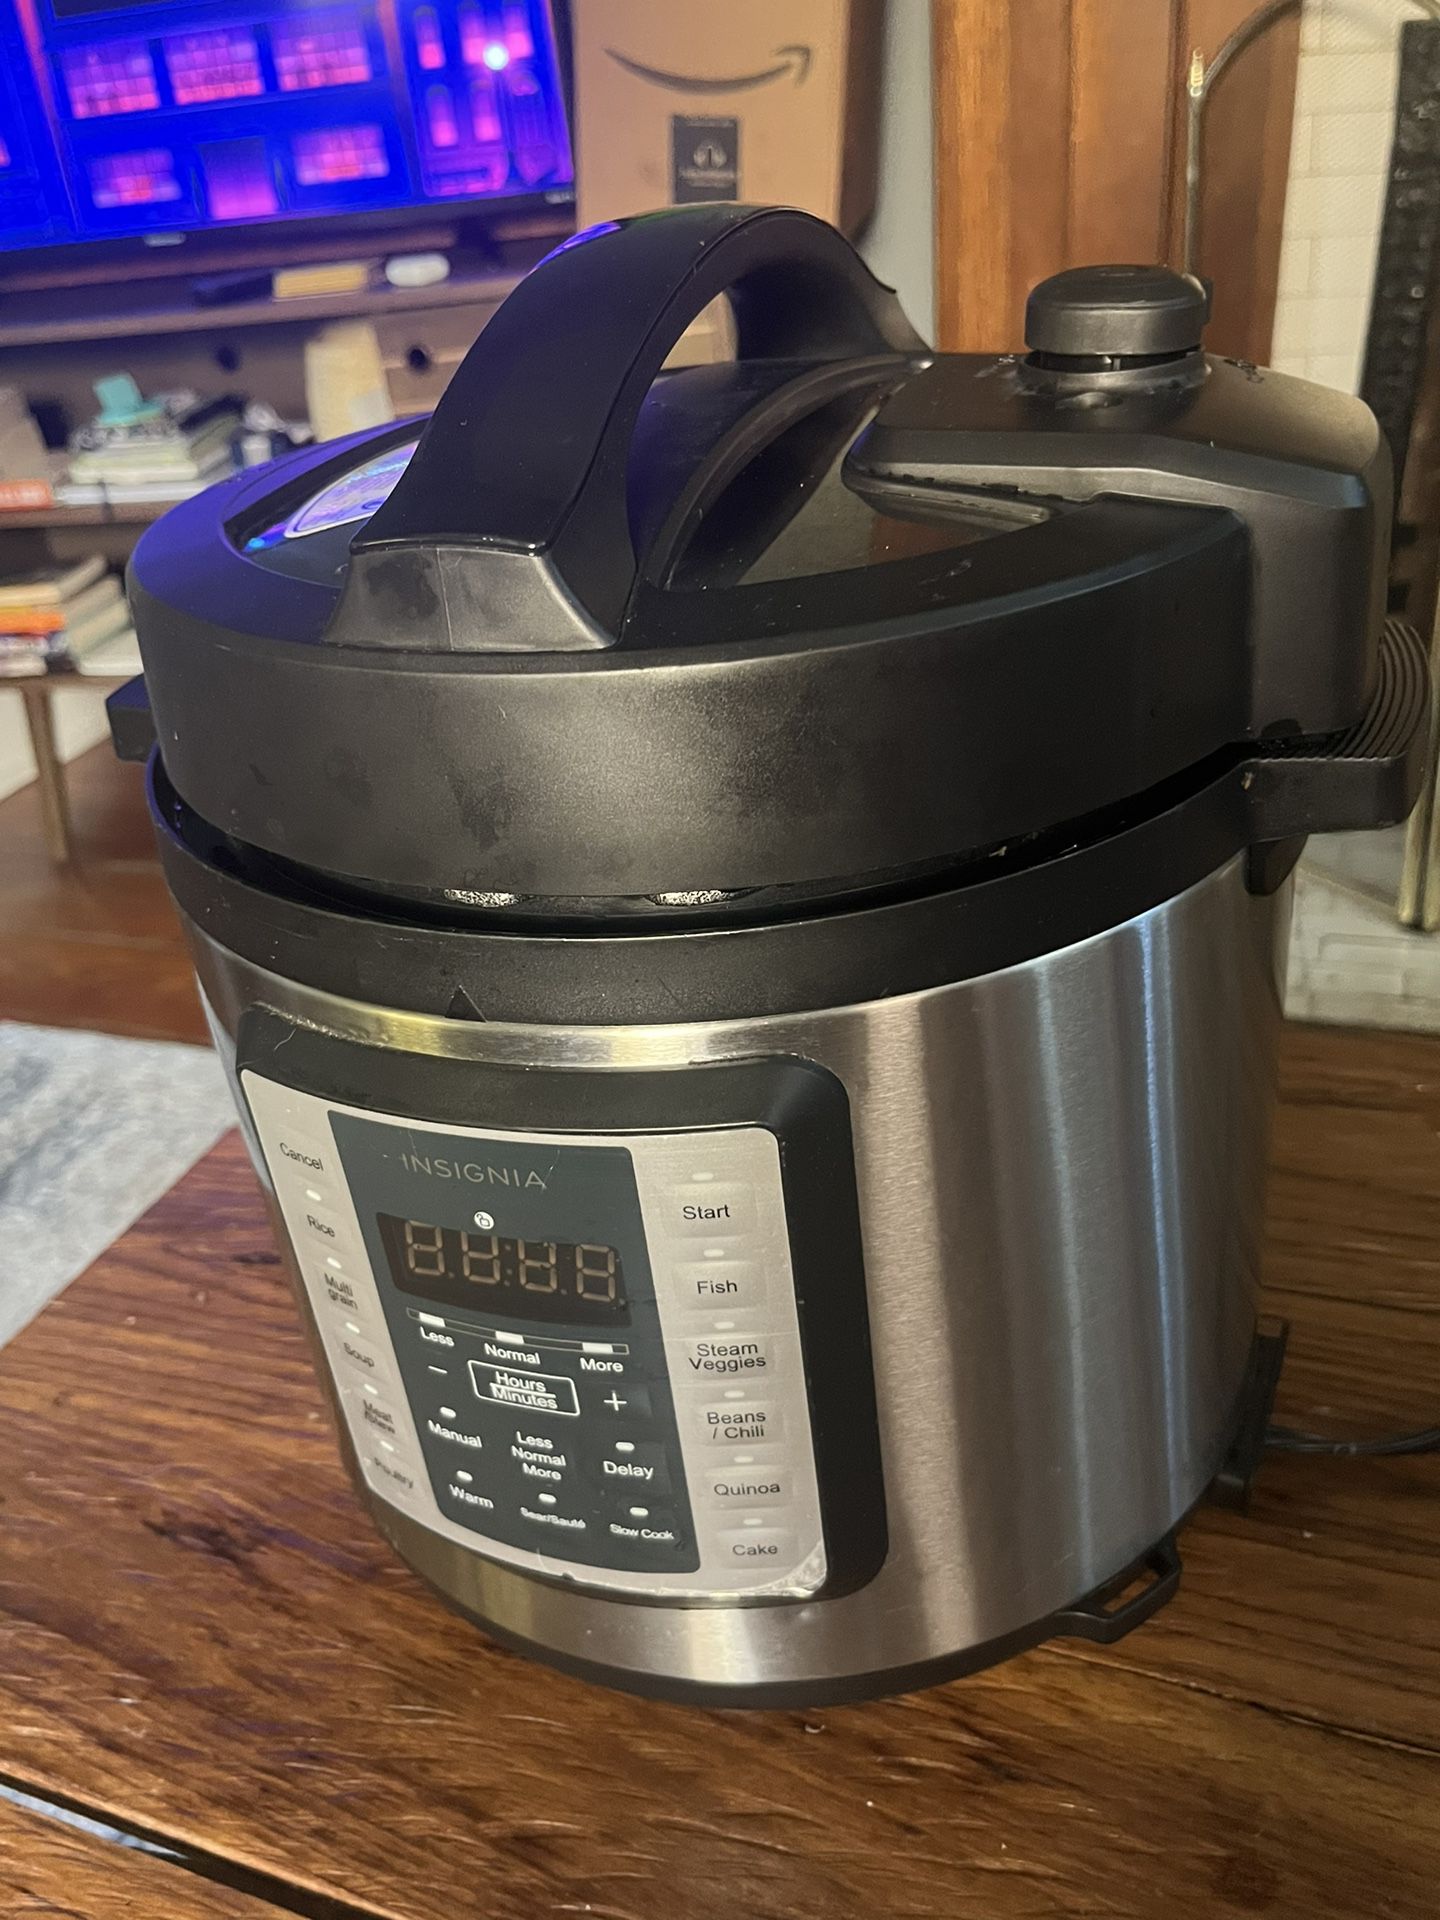 INSIGNIA 6 qt. Multi-function Pressure Cooker Review w/ Rice